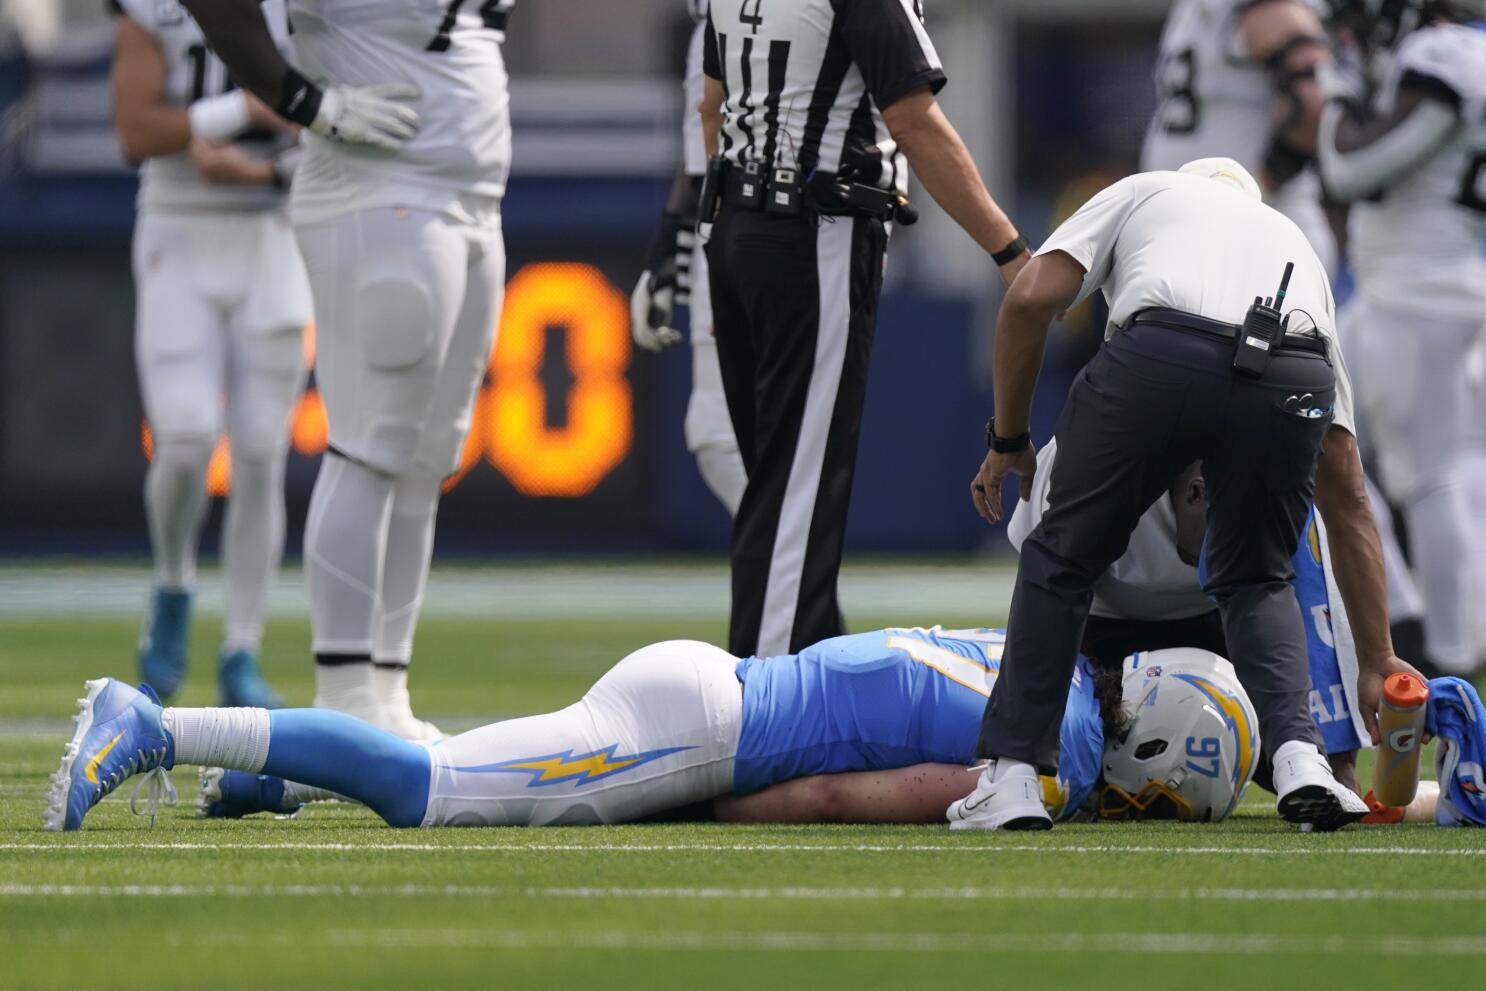 Joey Bosa needs surgery but Chargers hope he can return. - Los Angeles Times